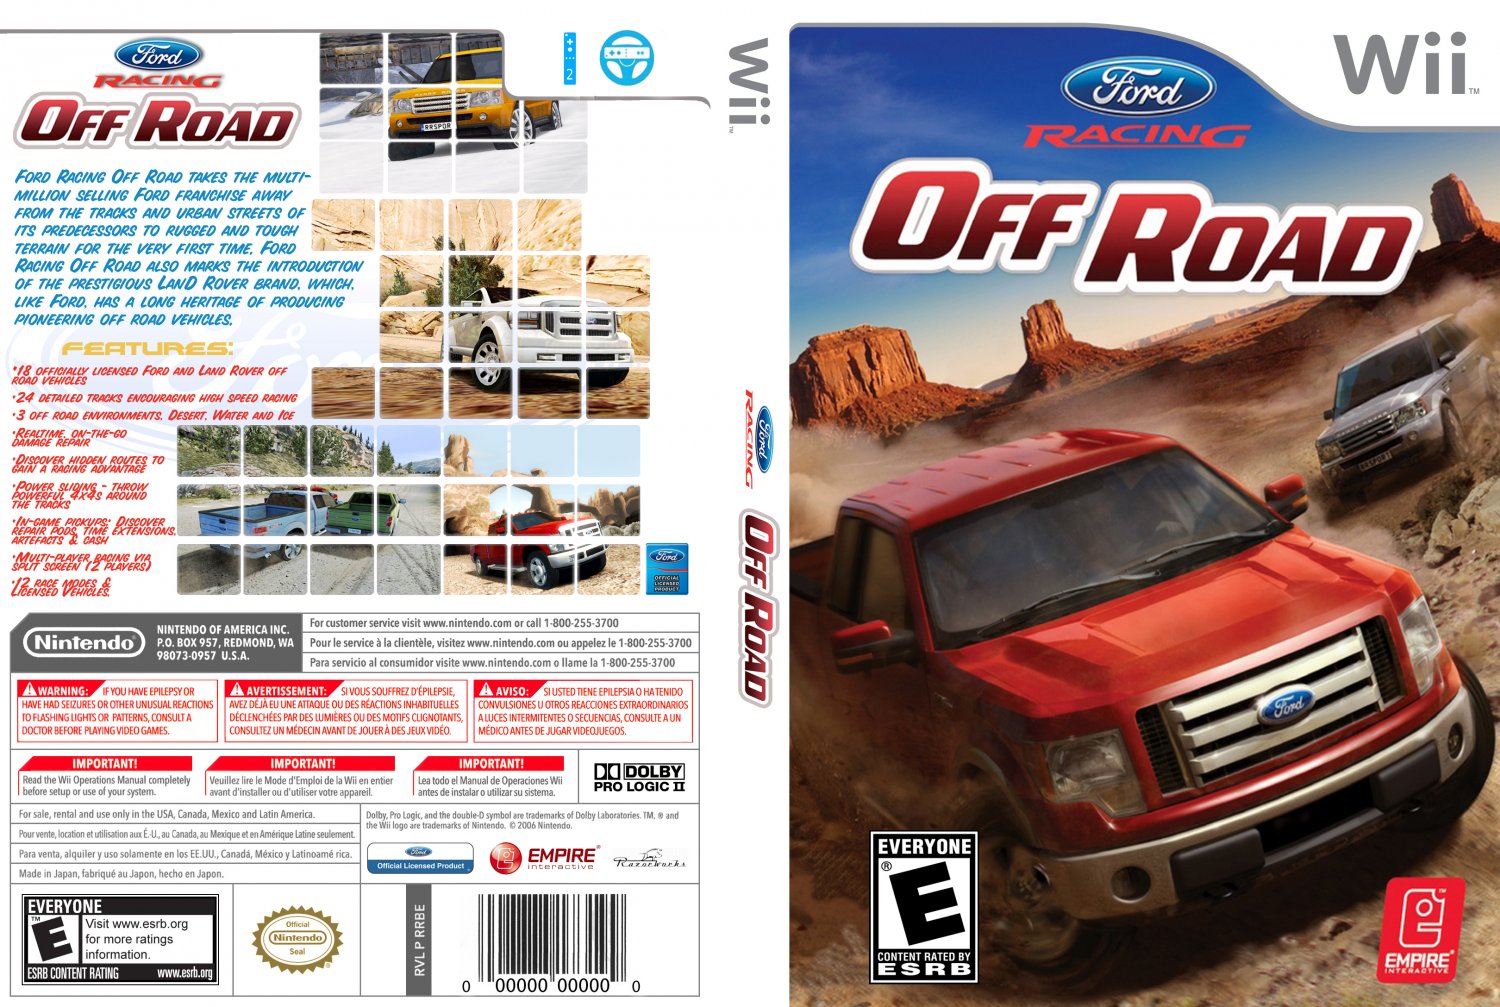 Ford off road racing wii #1